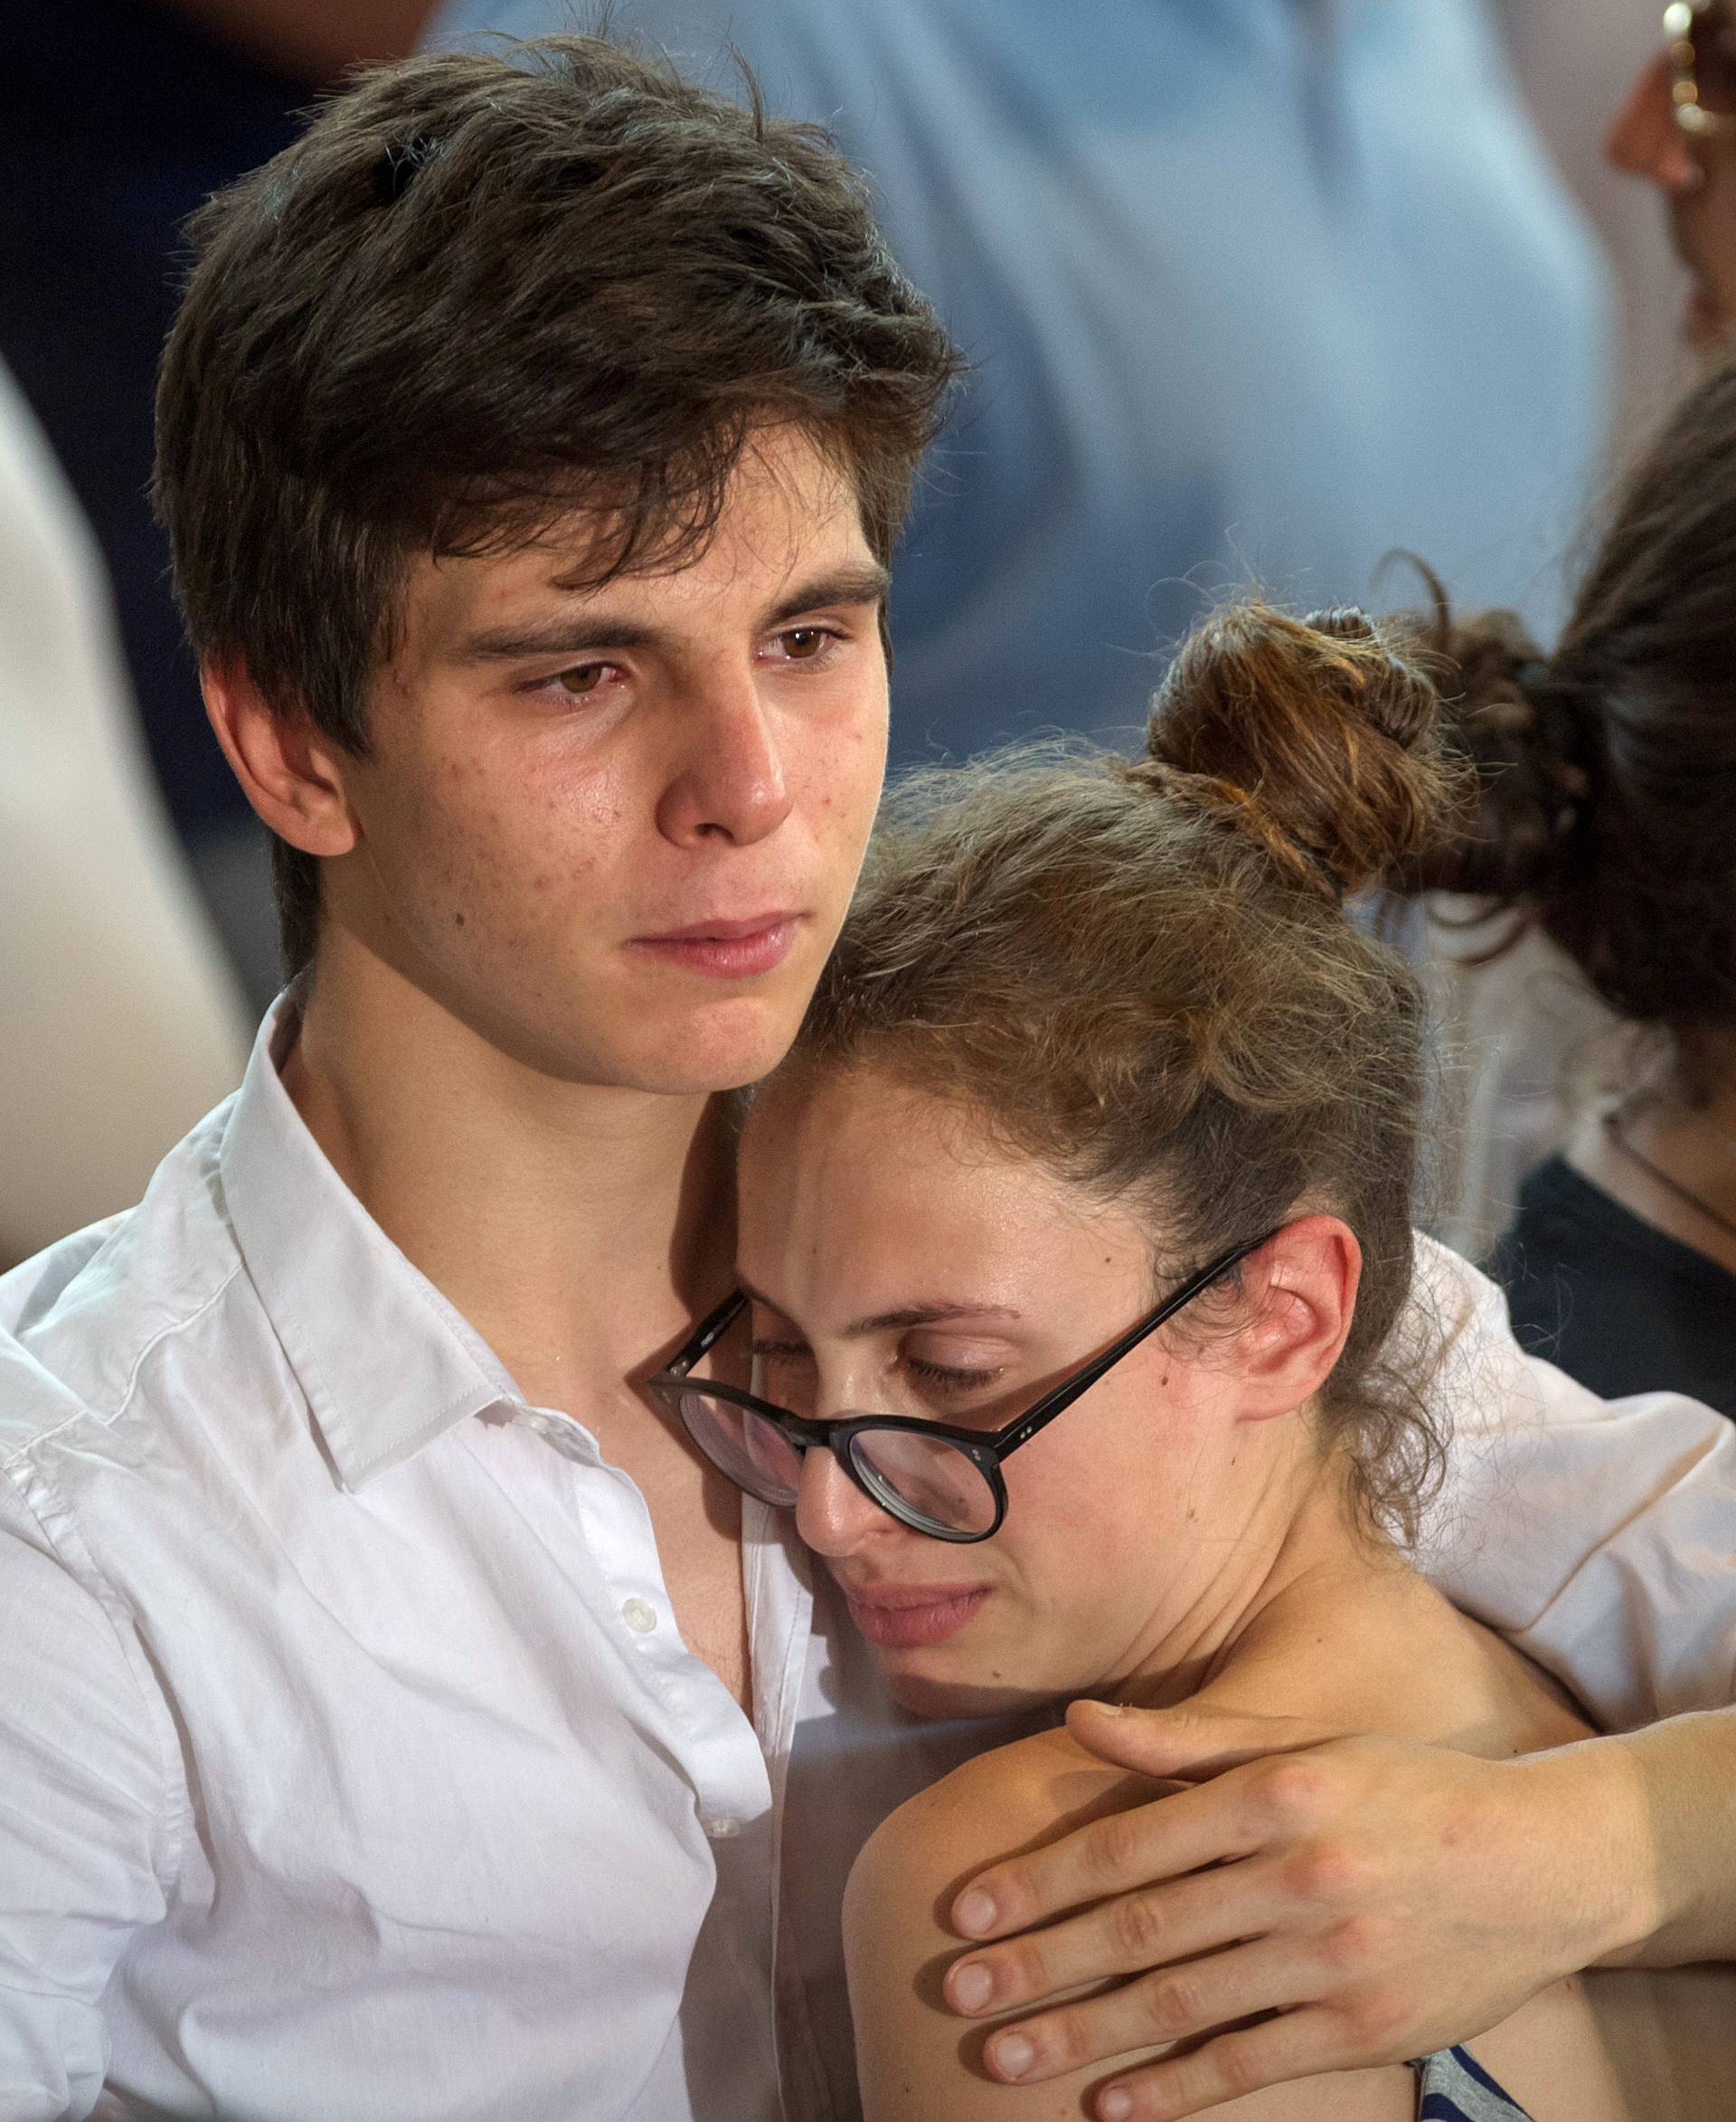 A man hugs a woman after a funeral service for victims of the earthquake inside a gym in Ascoli Piceno, Italy